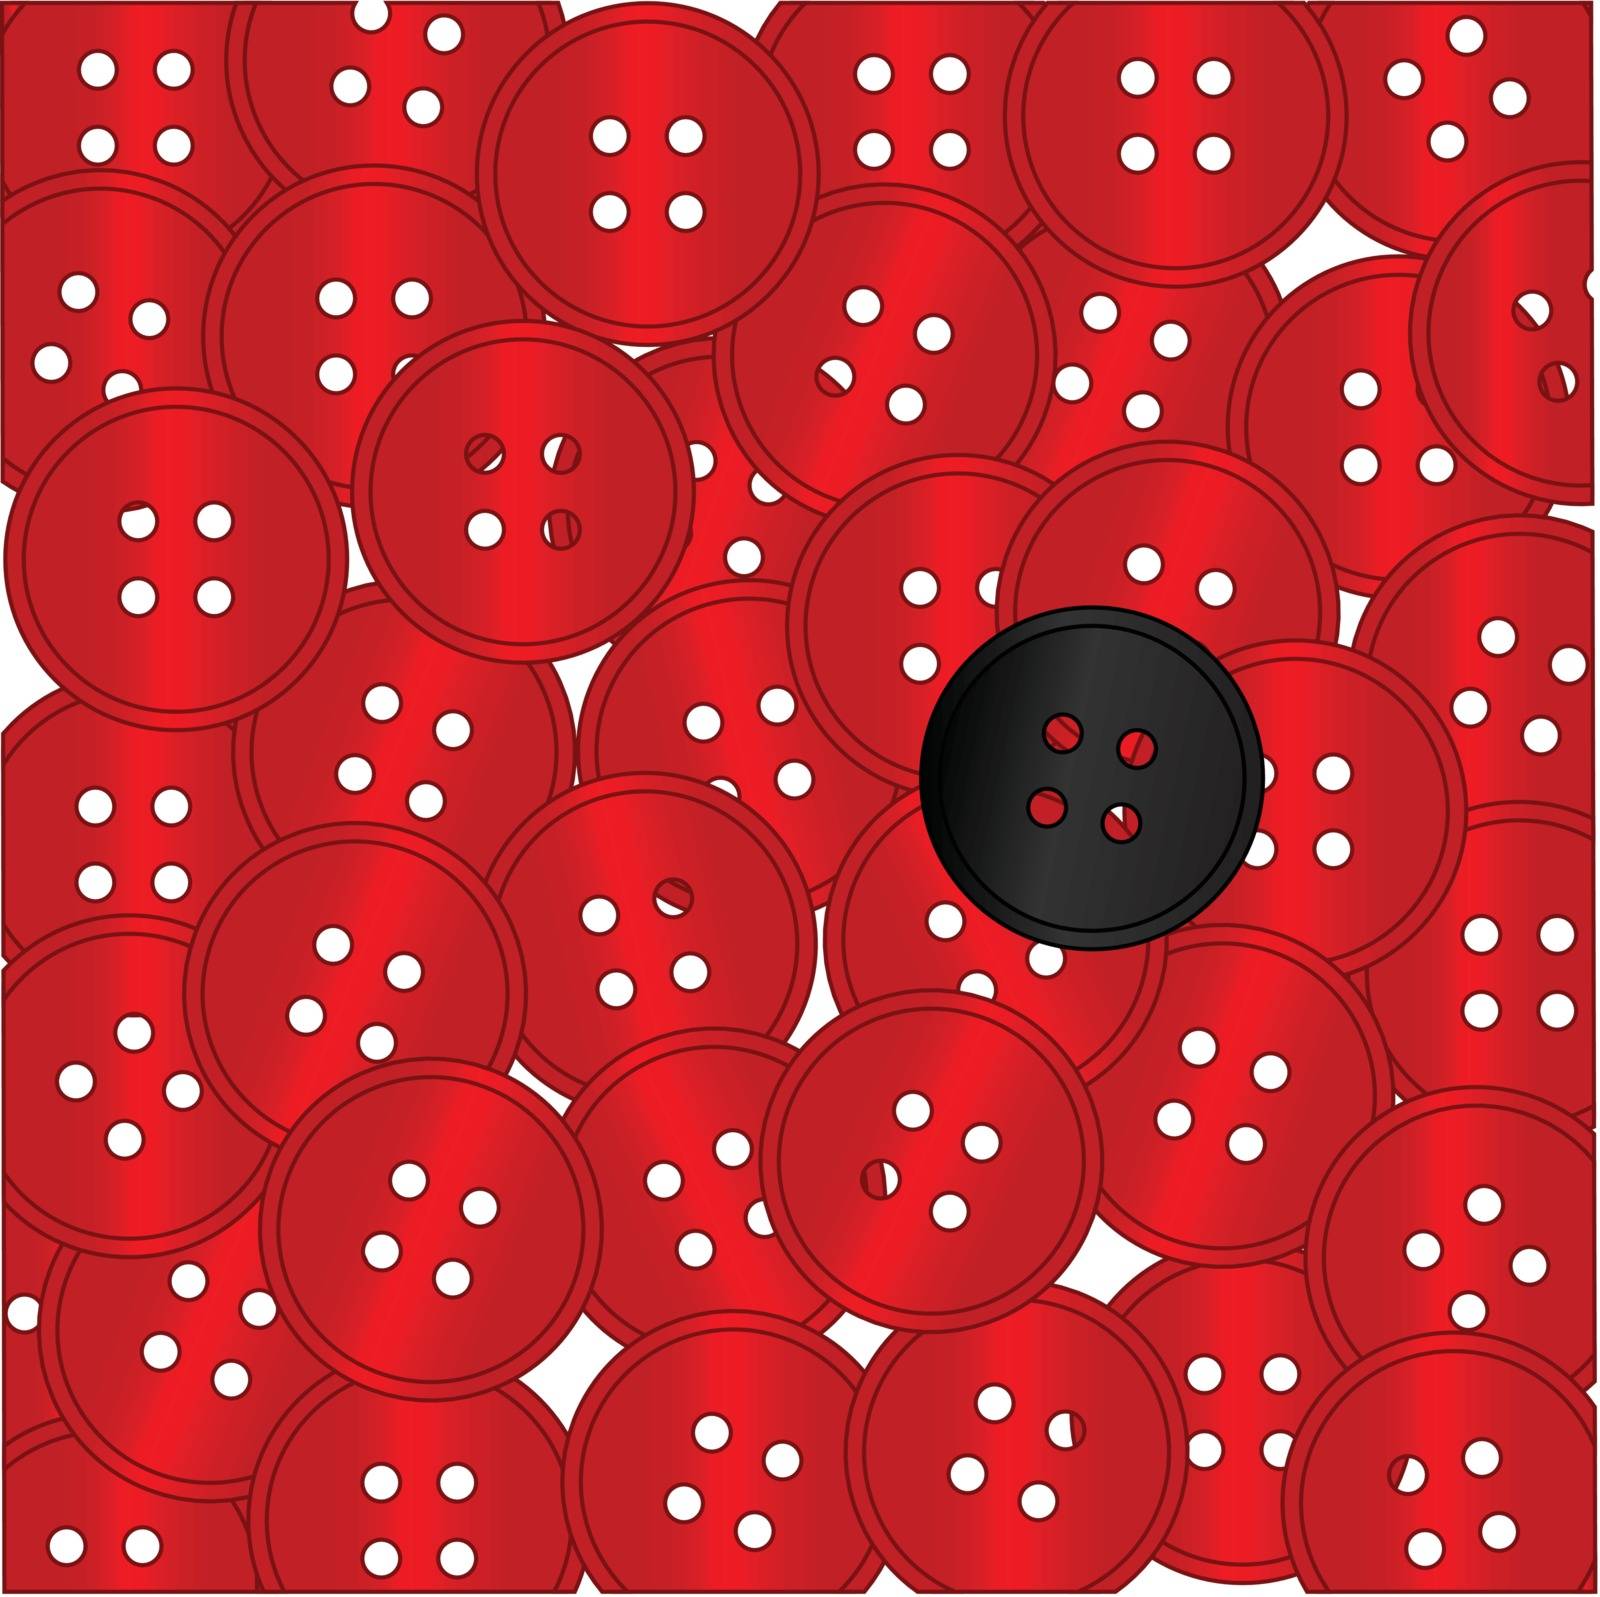 A collection of red buttons with the odd one out being black